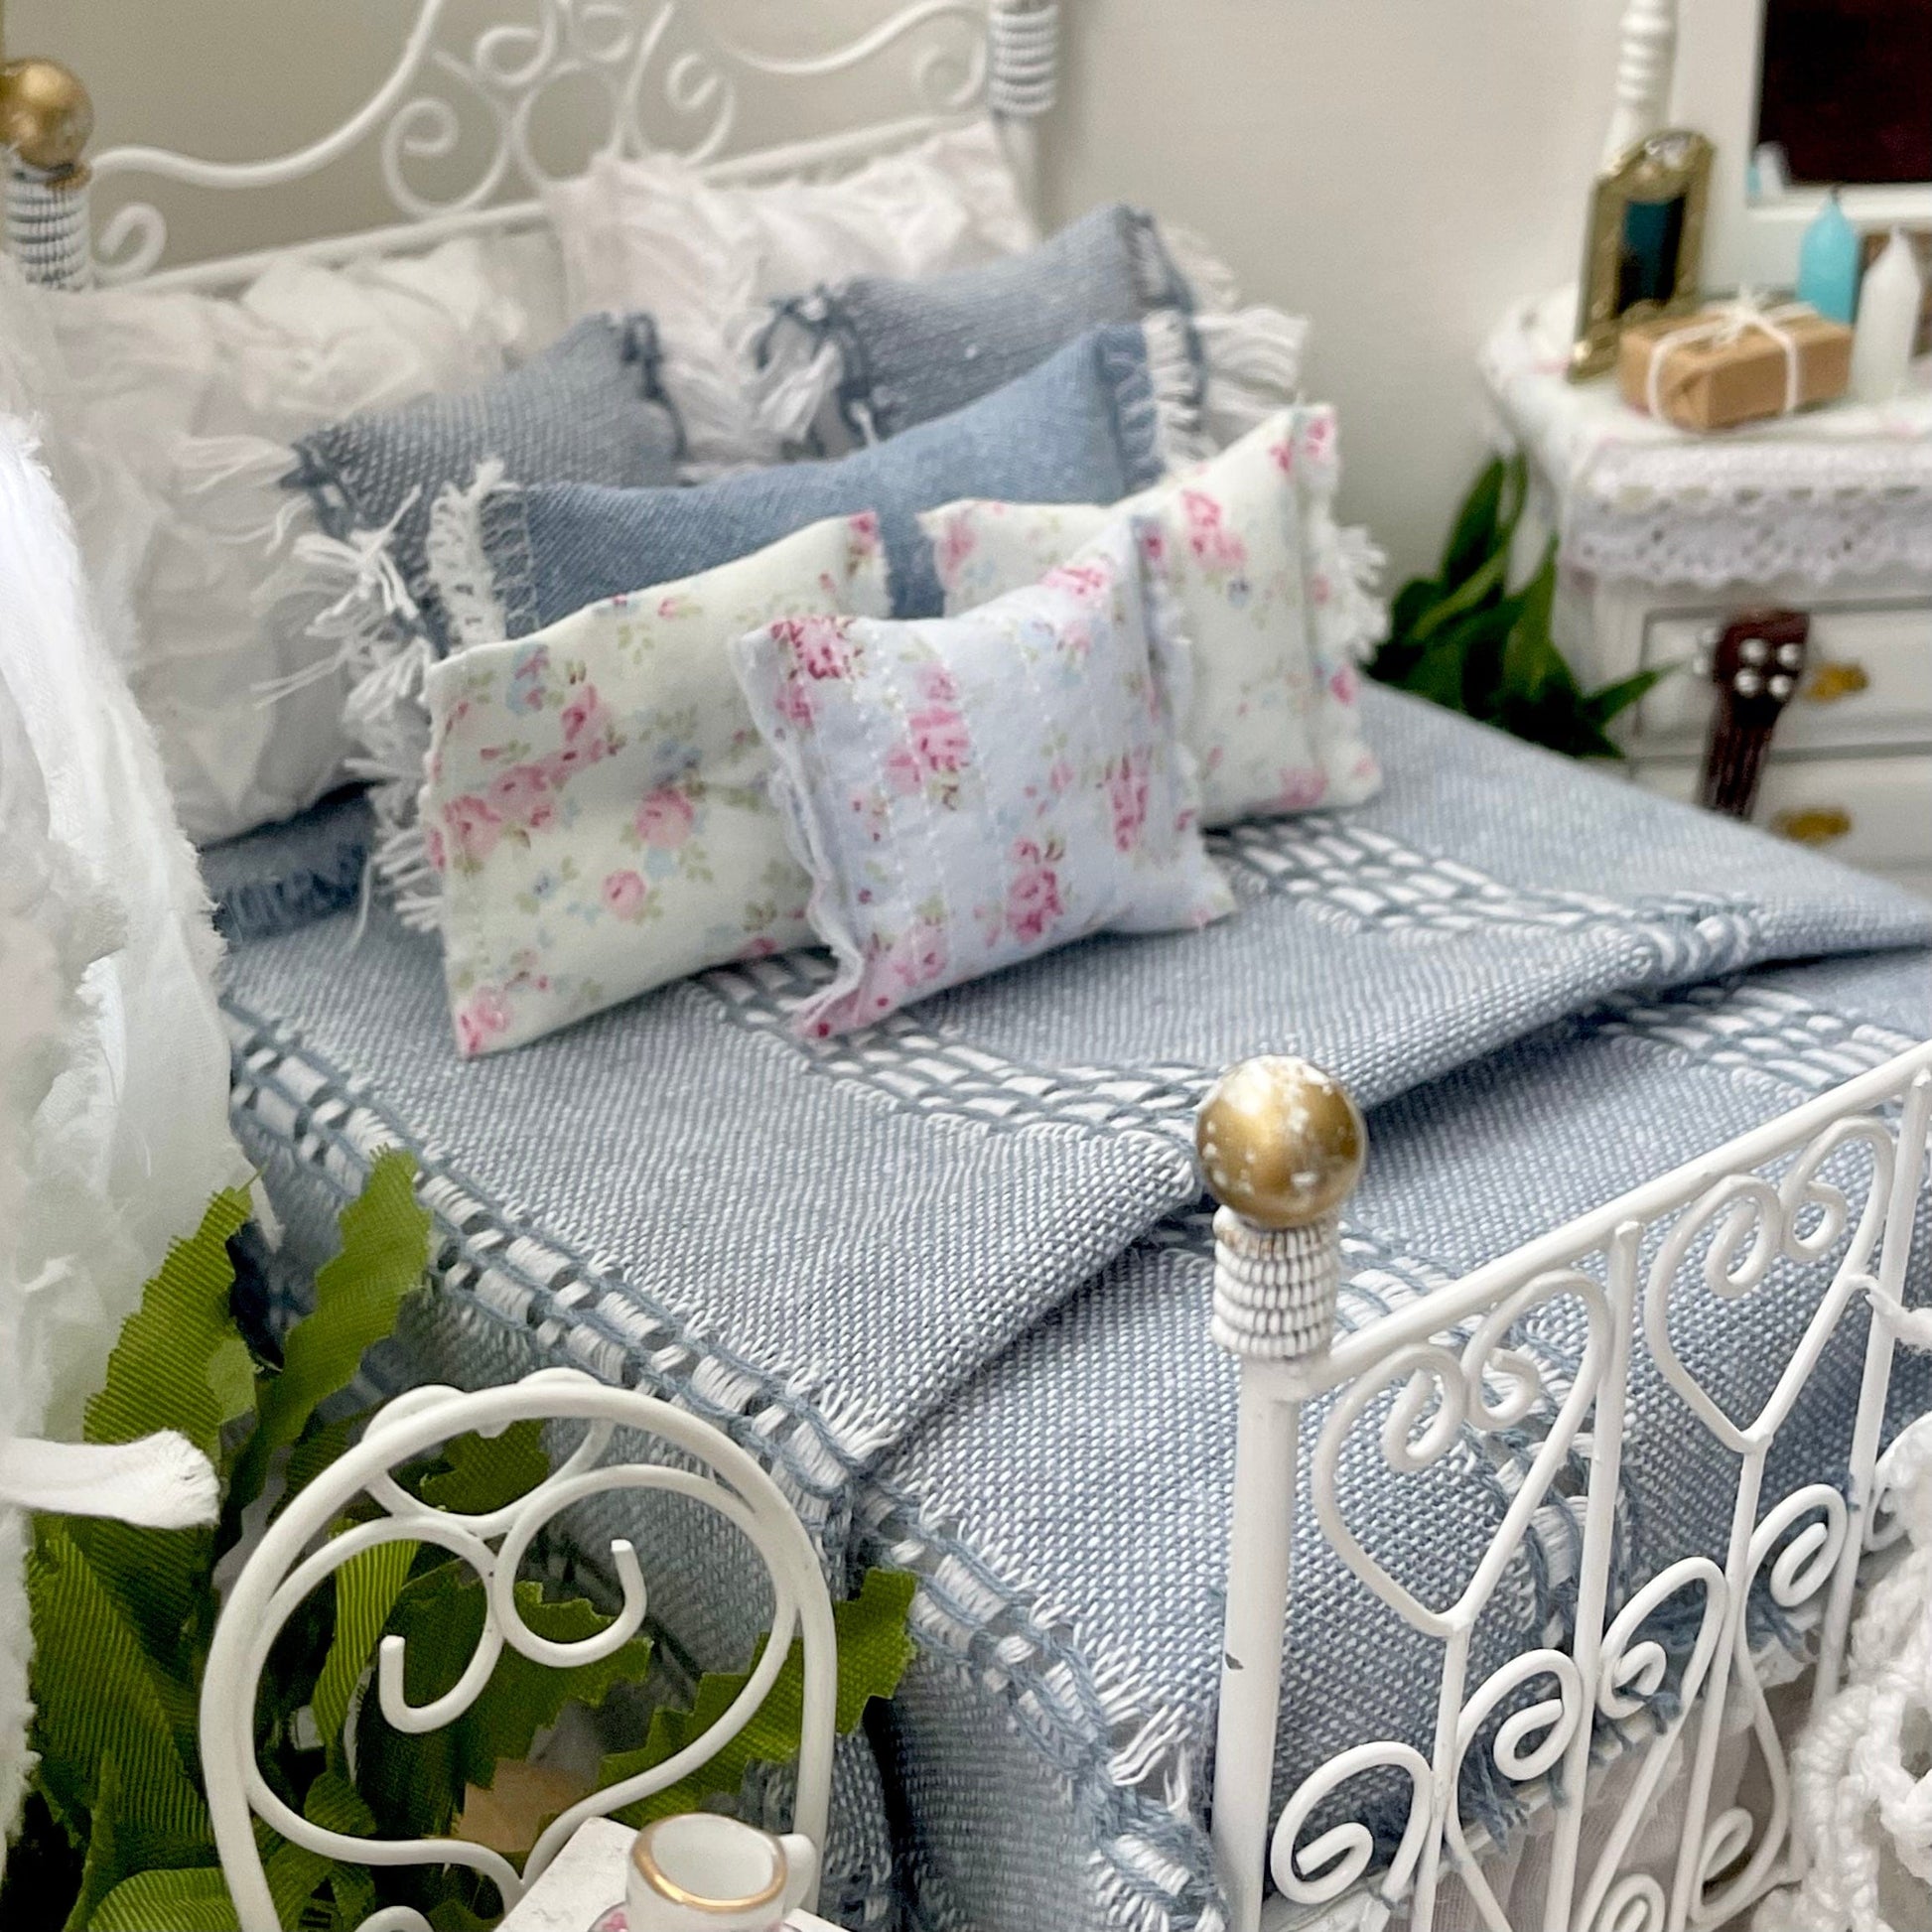 Chantallena Doll House Bedding Country Weekend - Raw Edged Blue Denim Single Bedding Set with Shabby Floral Pillows | Lillian Blue